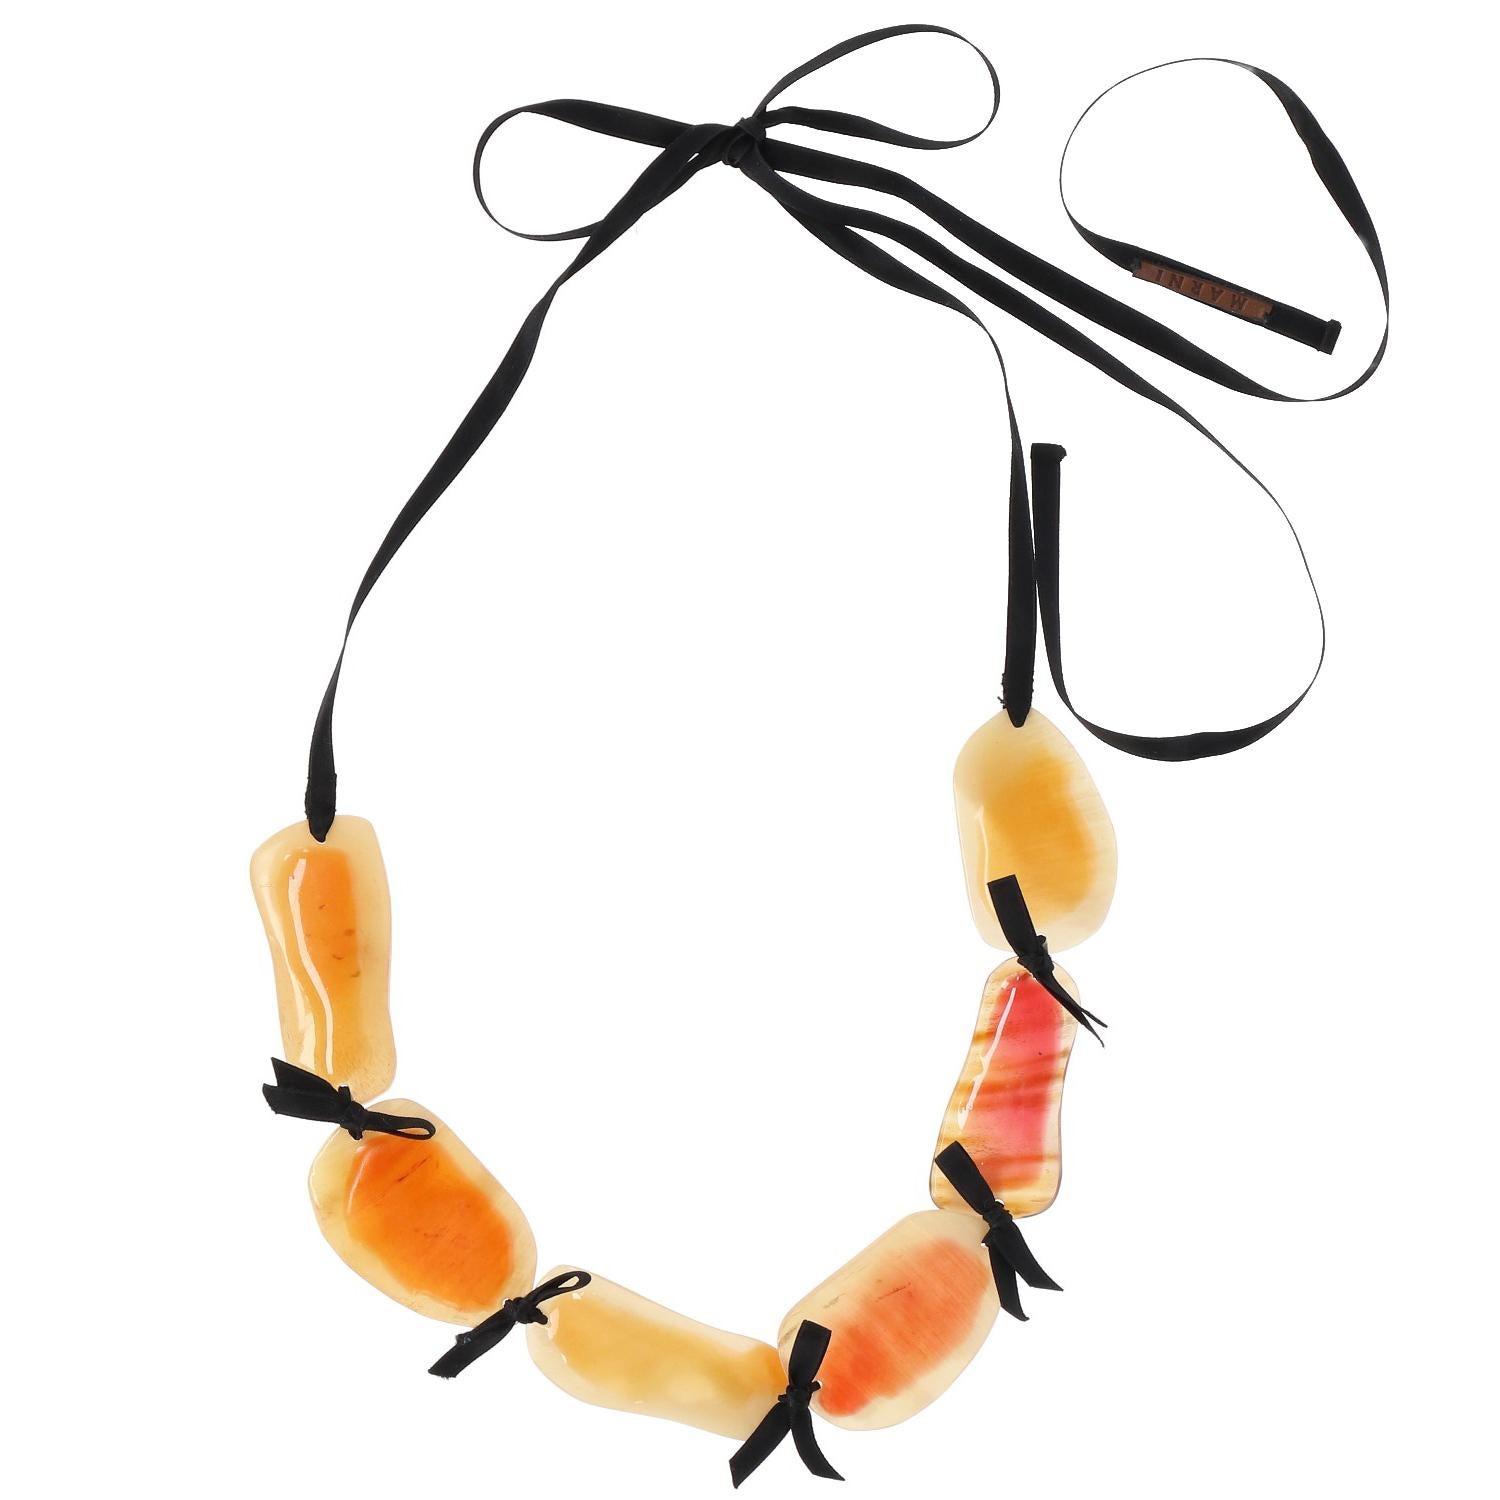 The fancy and stylish Marni necklace is made by irregular horn elements covered by orange and yellow resin and tied by the black satin lace.  Original dust-bag and packaging included. 
Shipping outside EU is not possible.

Length section horn